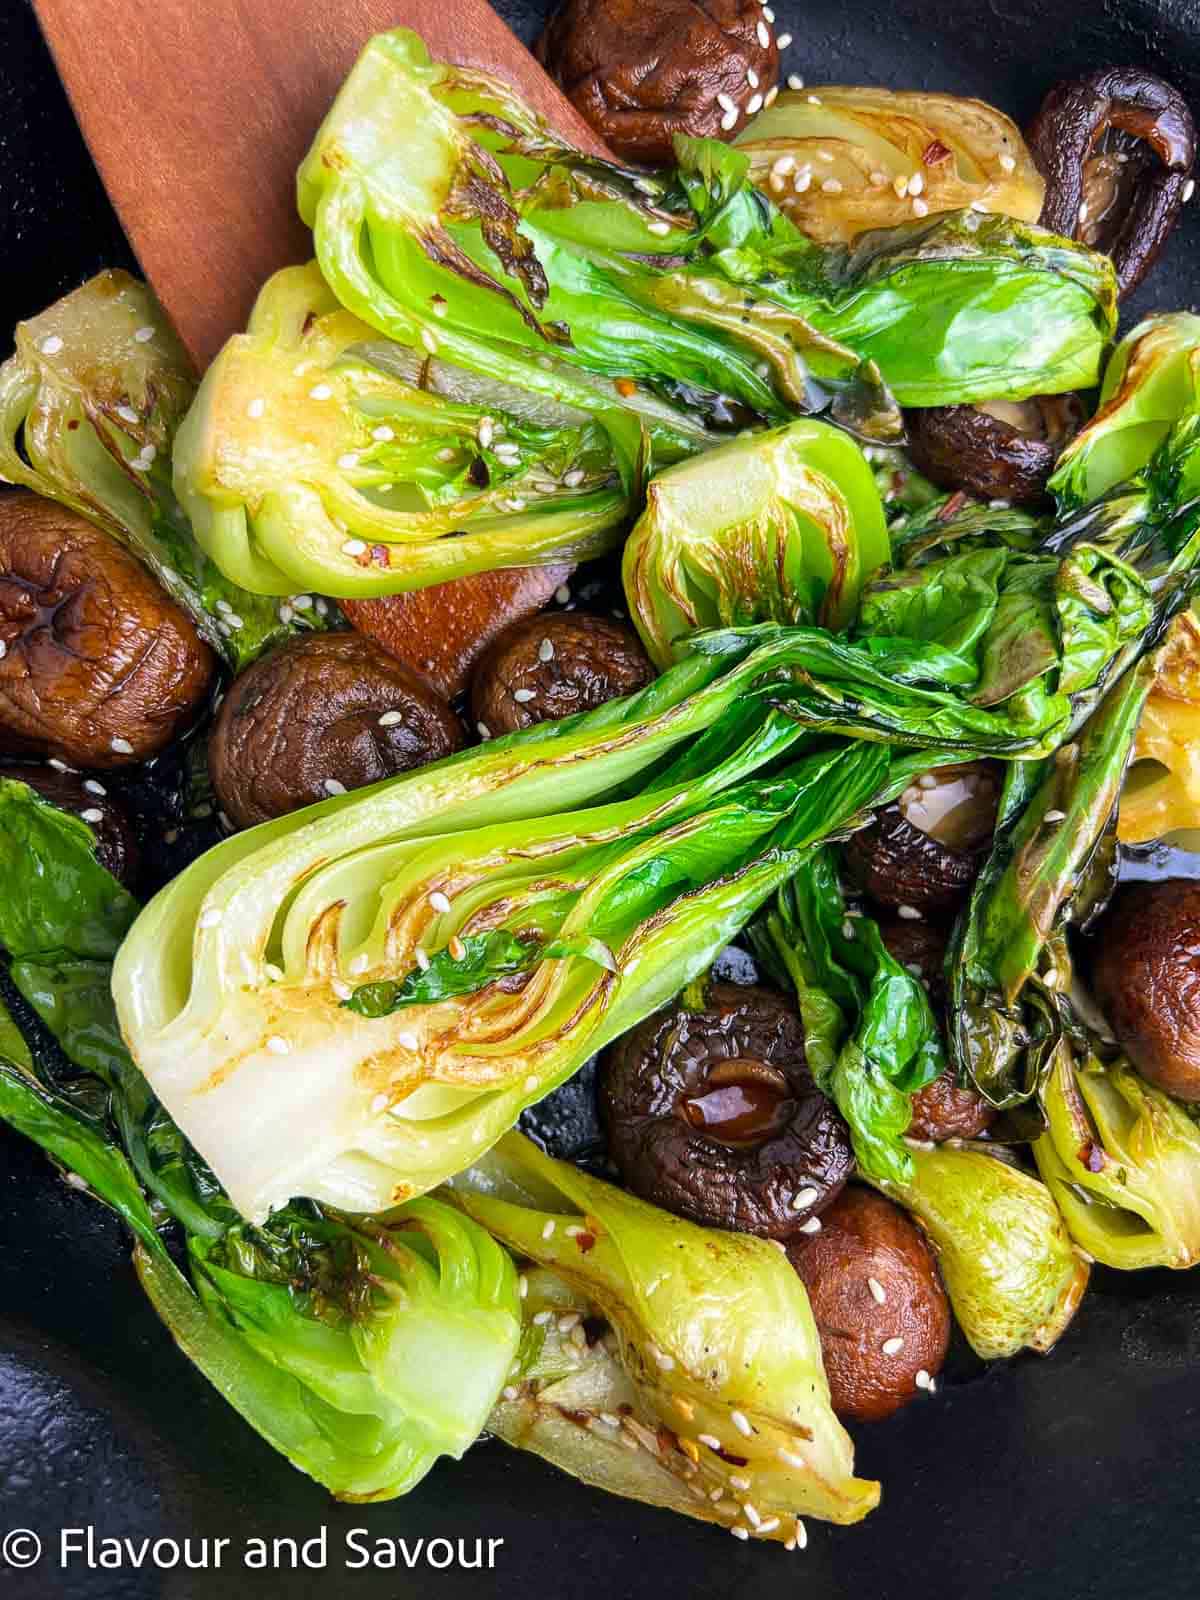 Bok choy and mushrooms stir fried and sprinkled with sesame seeds.